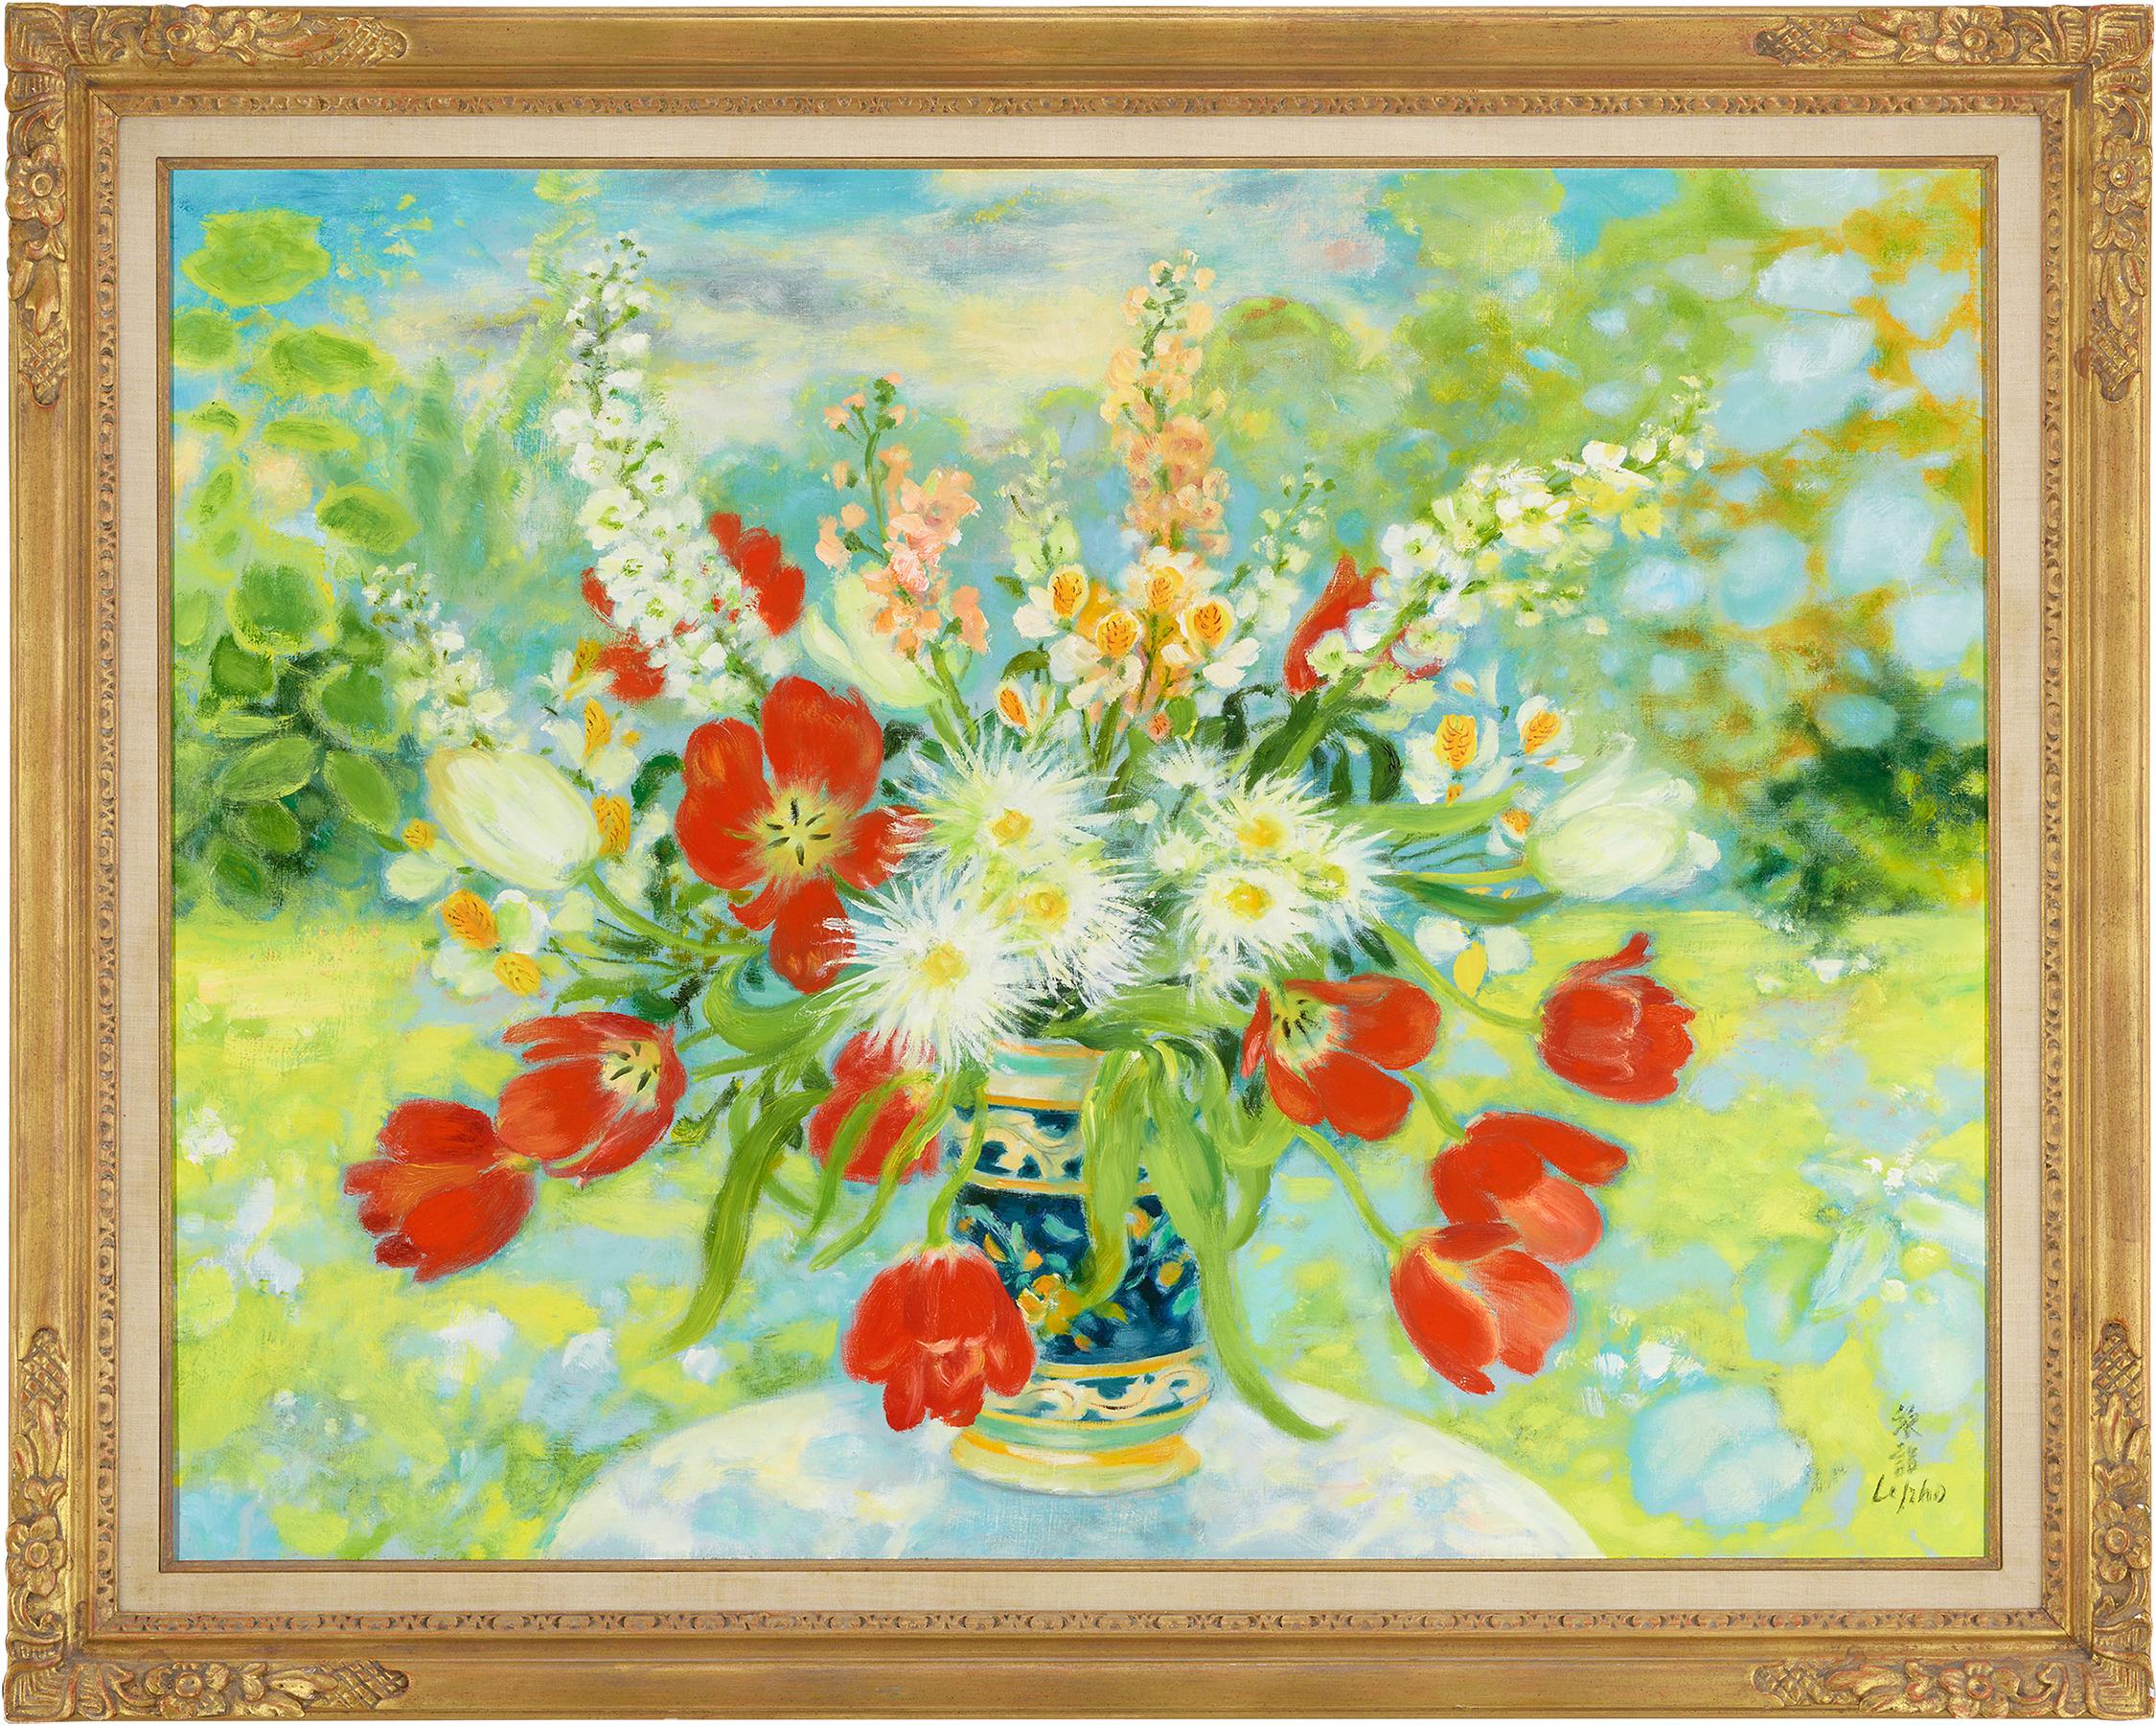 Les Tulipes et les Tokyos (Tulips and Tokyos) - Painting by Le Pho